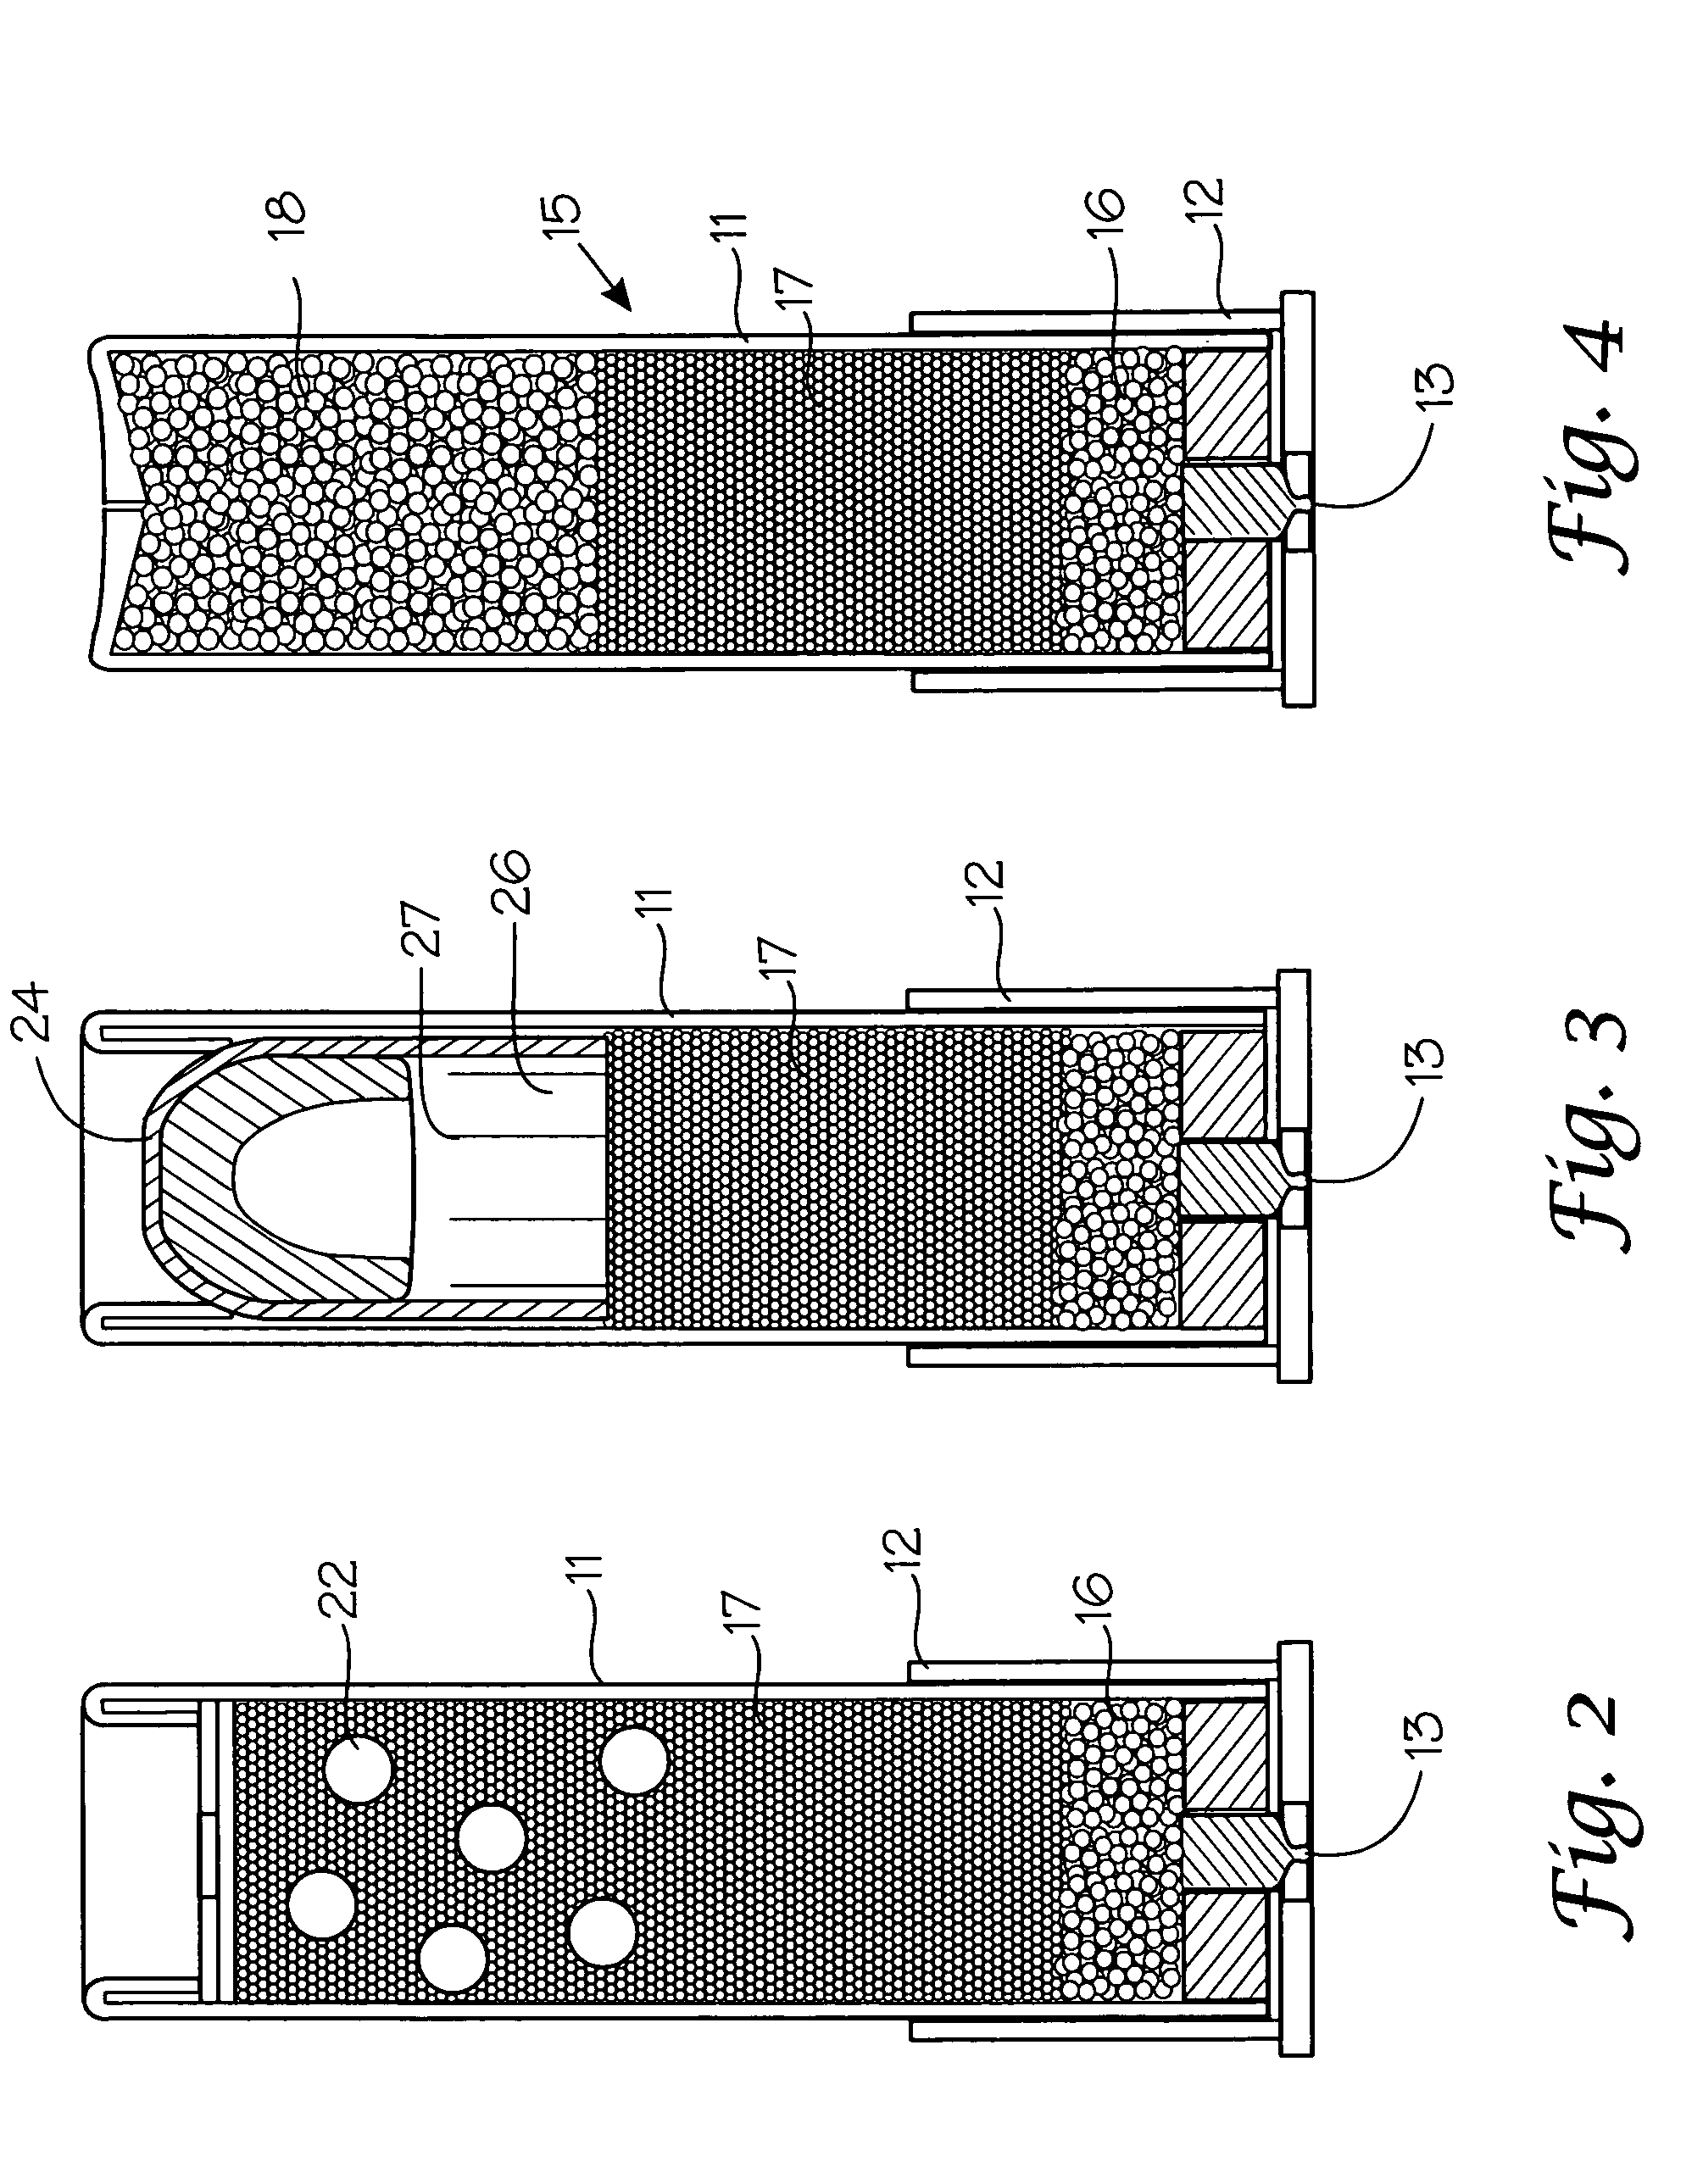 Method and apparatus for manufacturing wad-less ammunition